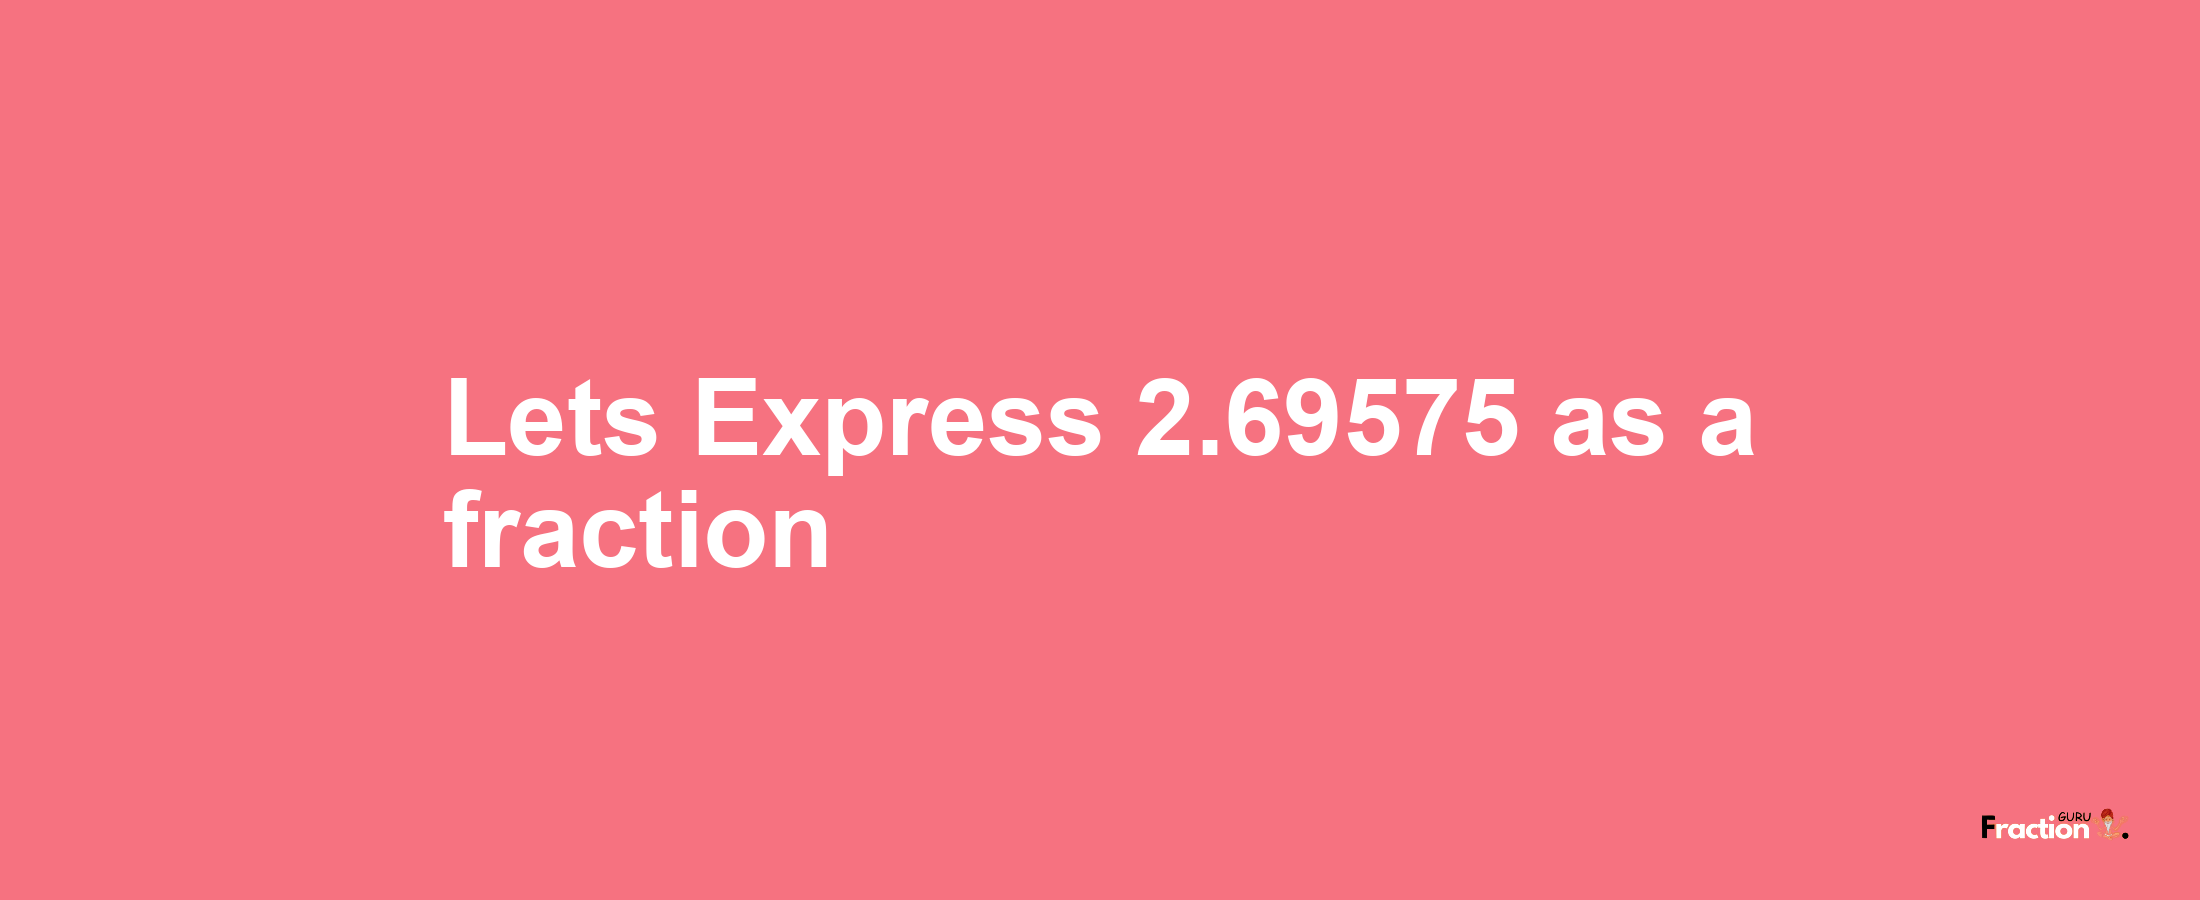 Lets Express 2.69575 as afraction